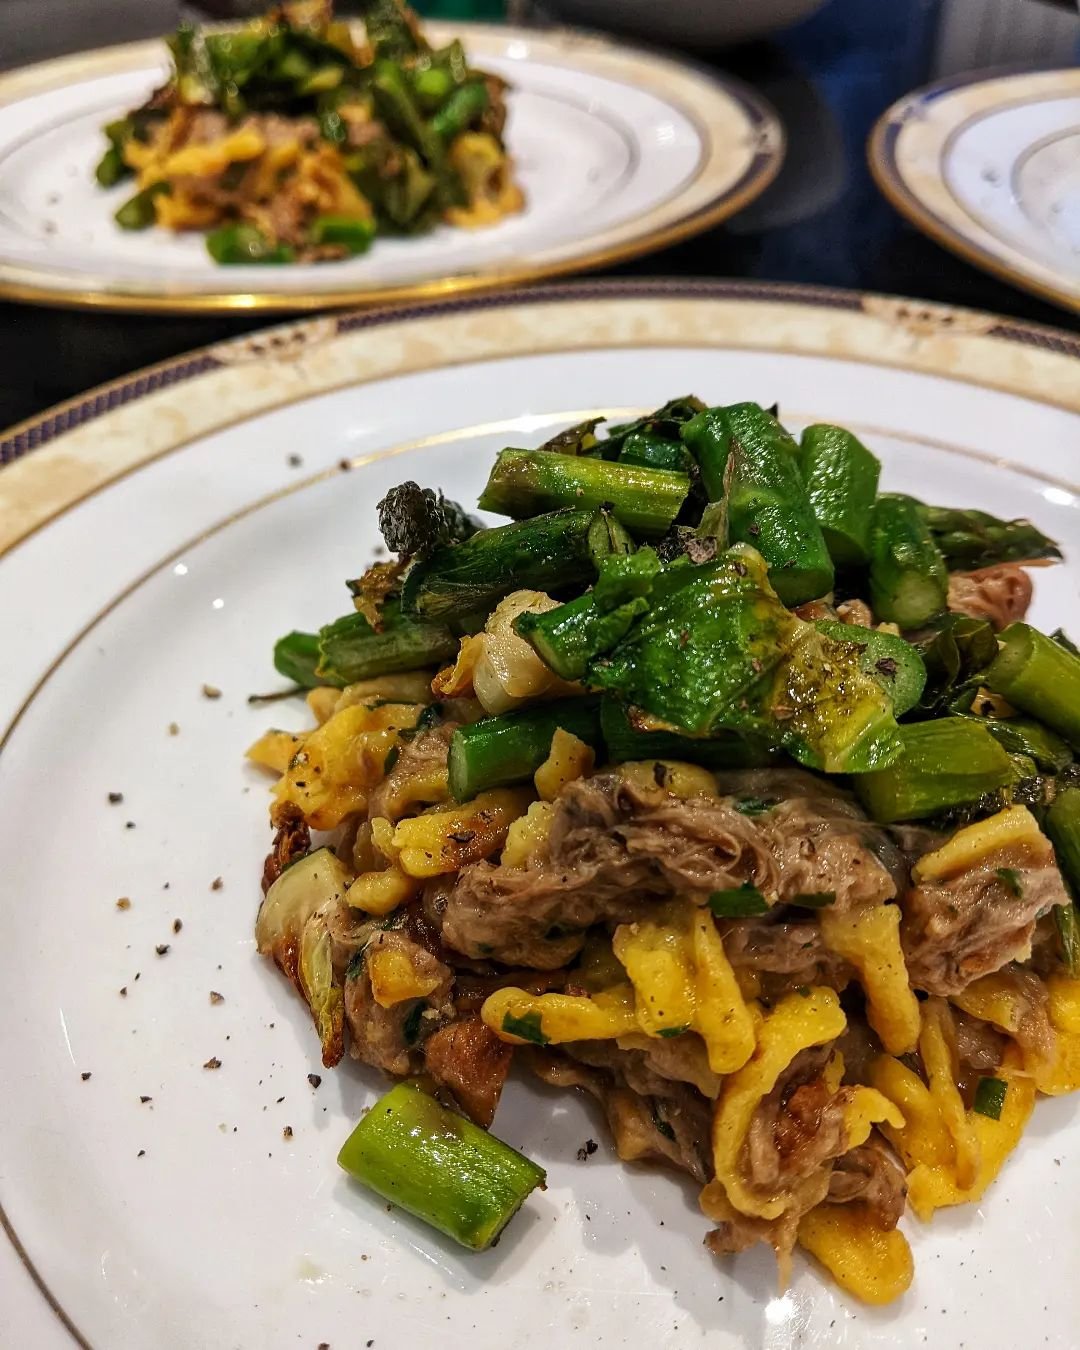 Braised lamb sp&auml;tzle with asparagus and spring greens 🧡 the perfect combination of hearty, full flavoured food for this temperamental weather with lovely fresh accents of seasonal vegetables! 🥬🍴